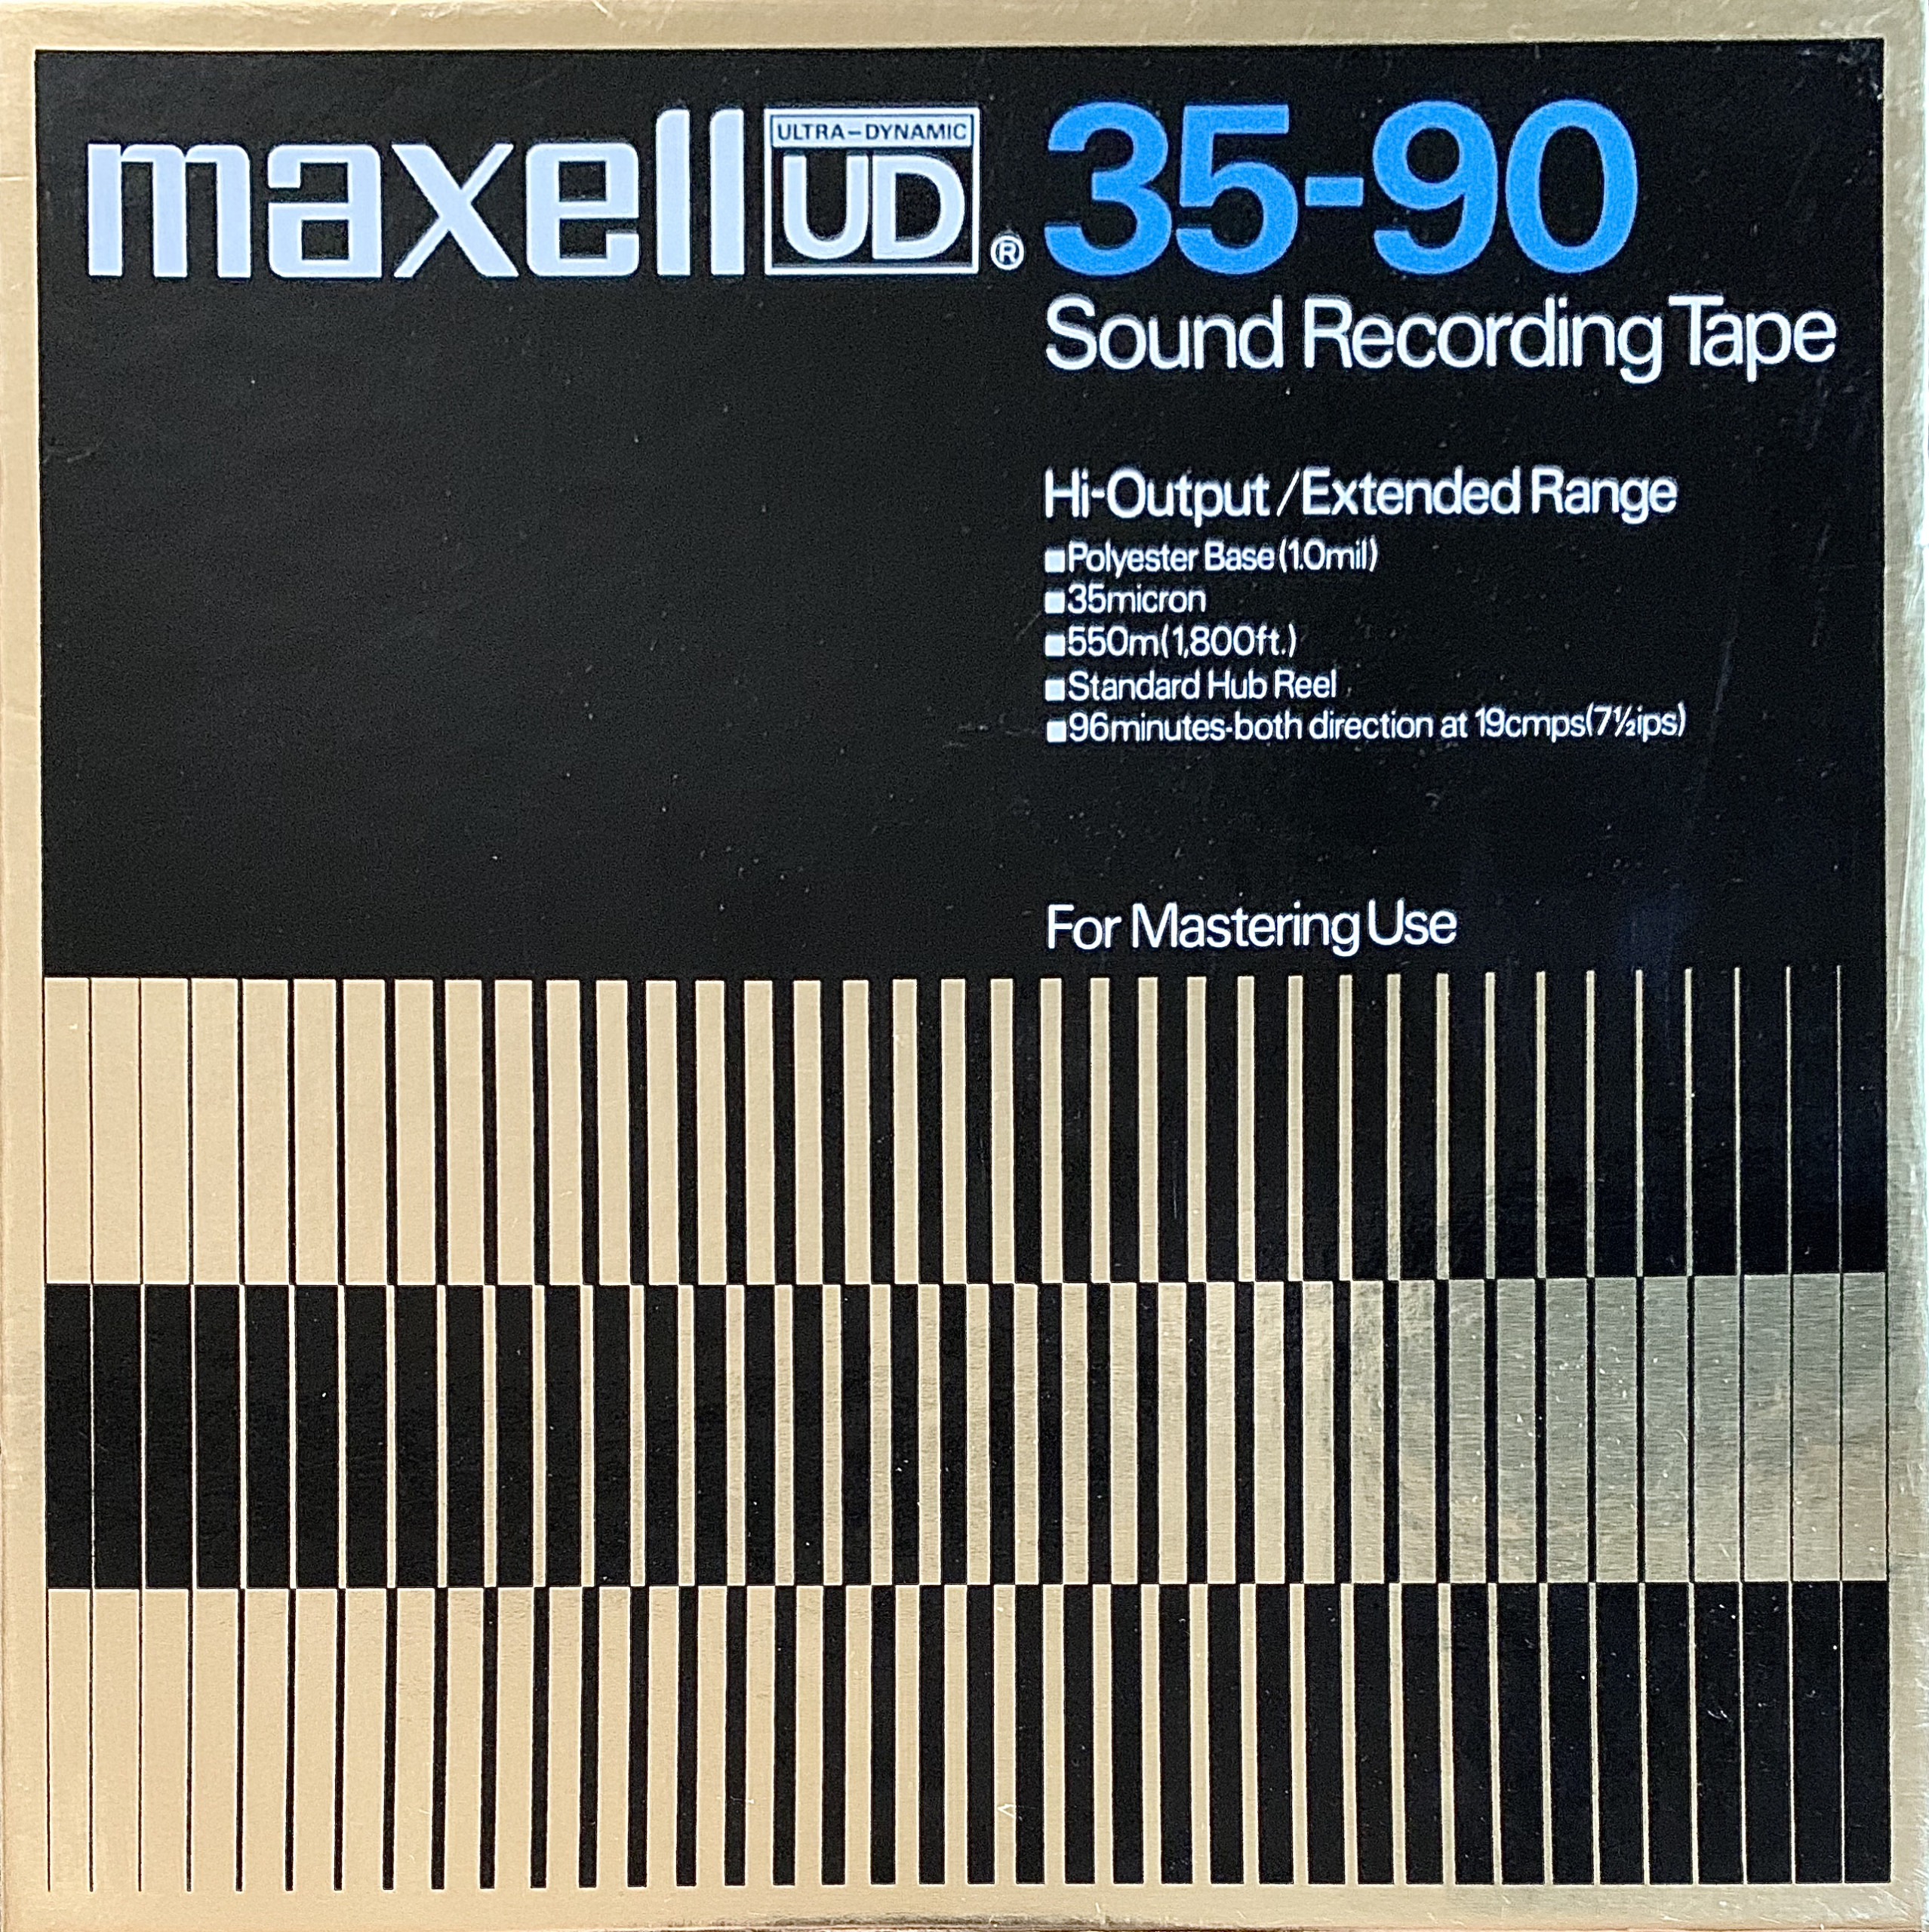 VINTAGE New Old Stock Maxell UD XL 50-120B Sound Recording Tape Hi-output  Extended Range Metal Reel 132 Min Both Directions Black Coated 